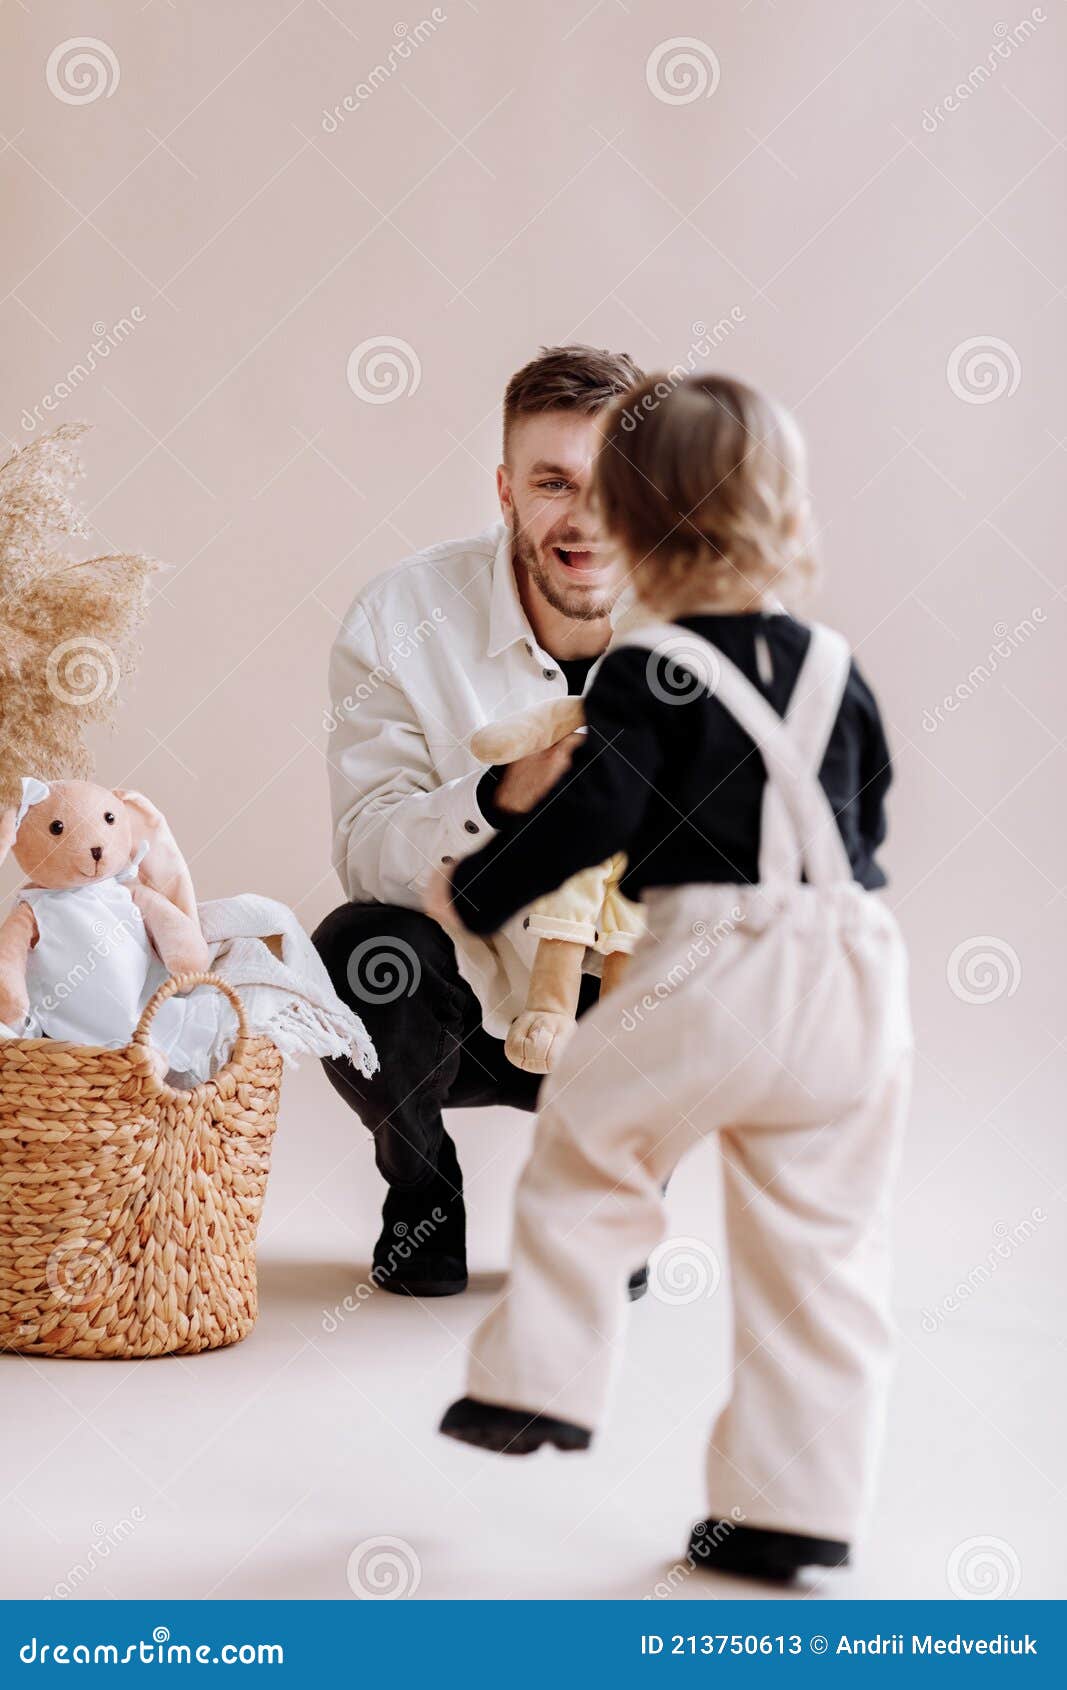 Stylish Man is Having Fun with Cute Child Baby Girl in Decorated ...